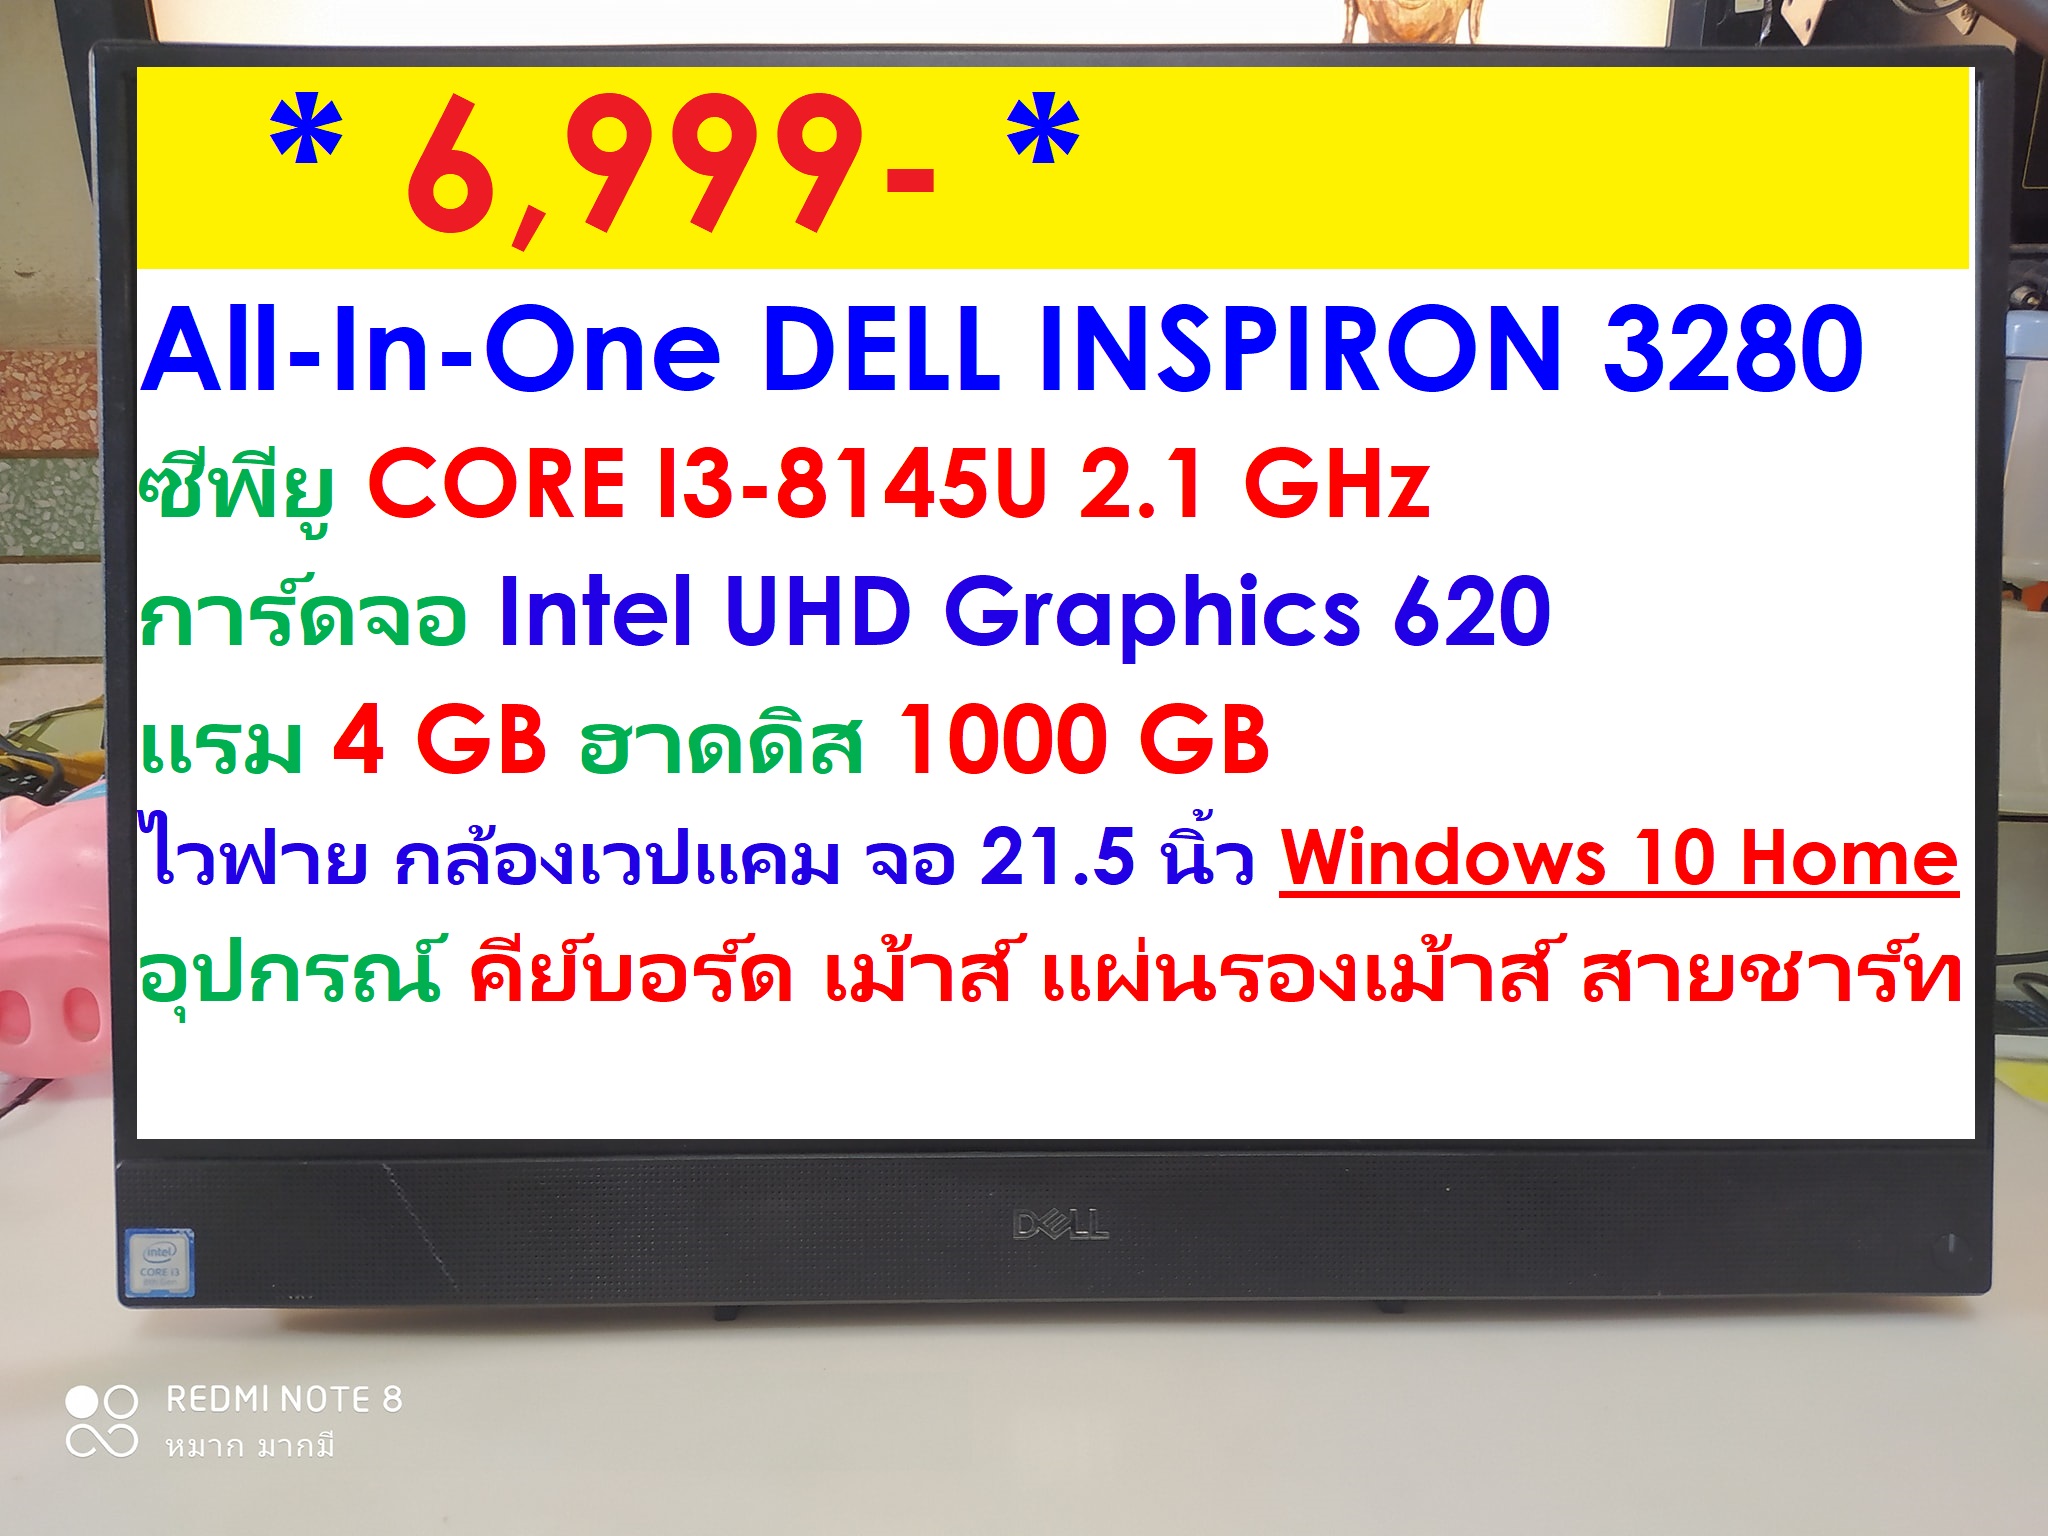 DELL INSPIRON 3280  All-In-One  รูปที่ 1